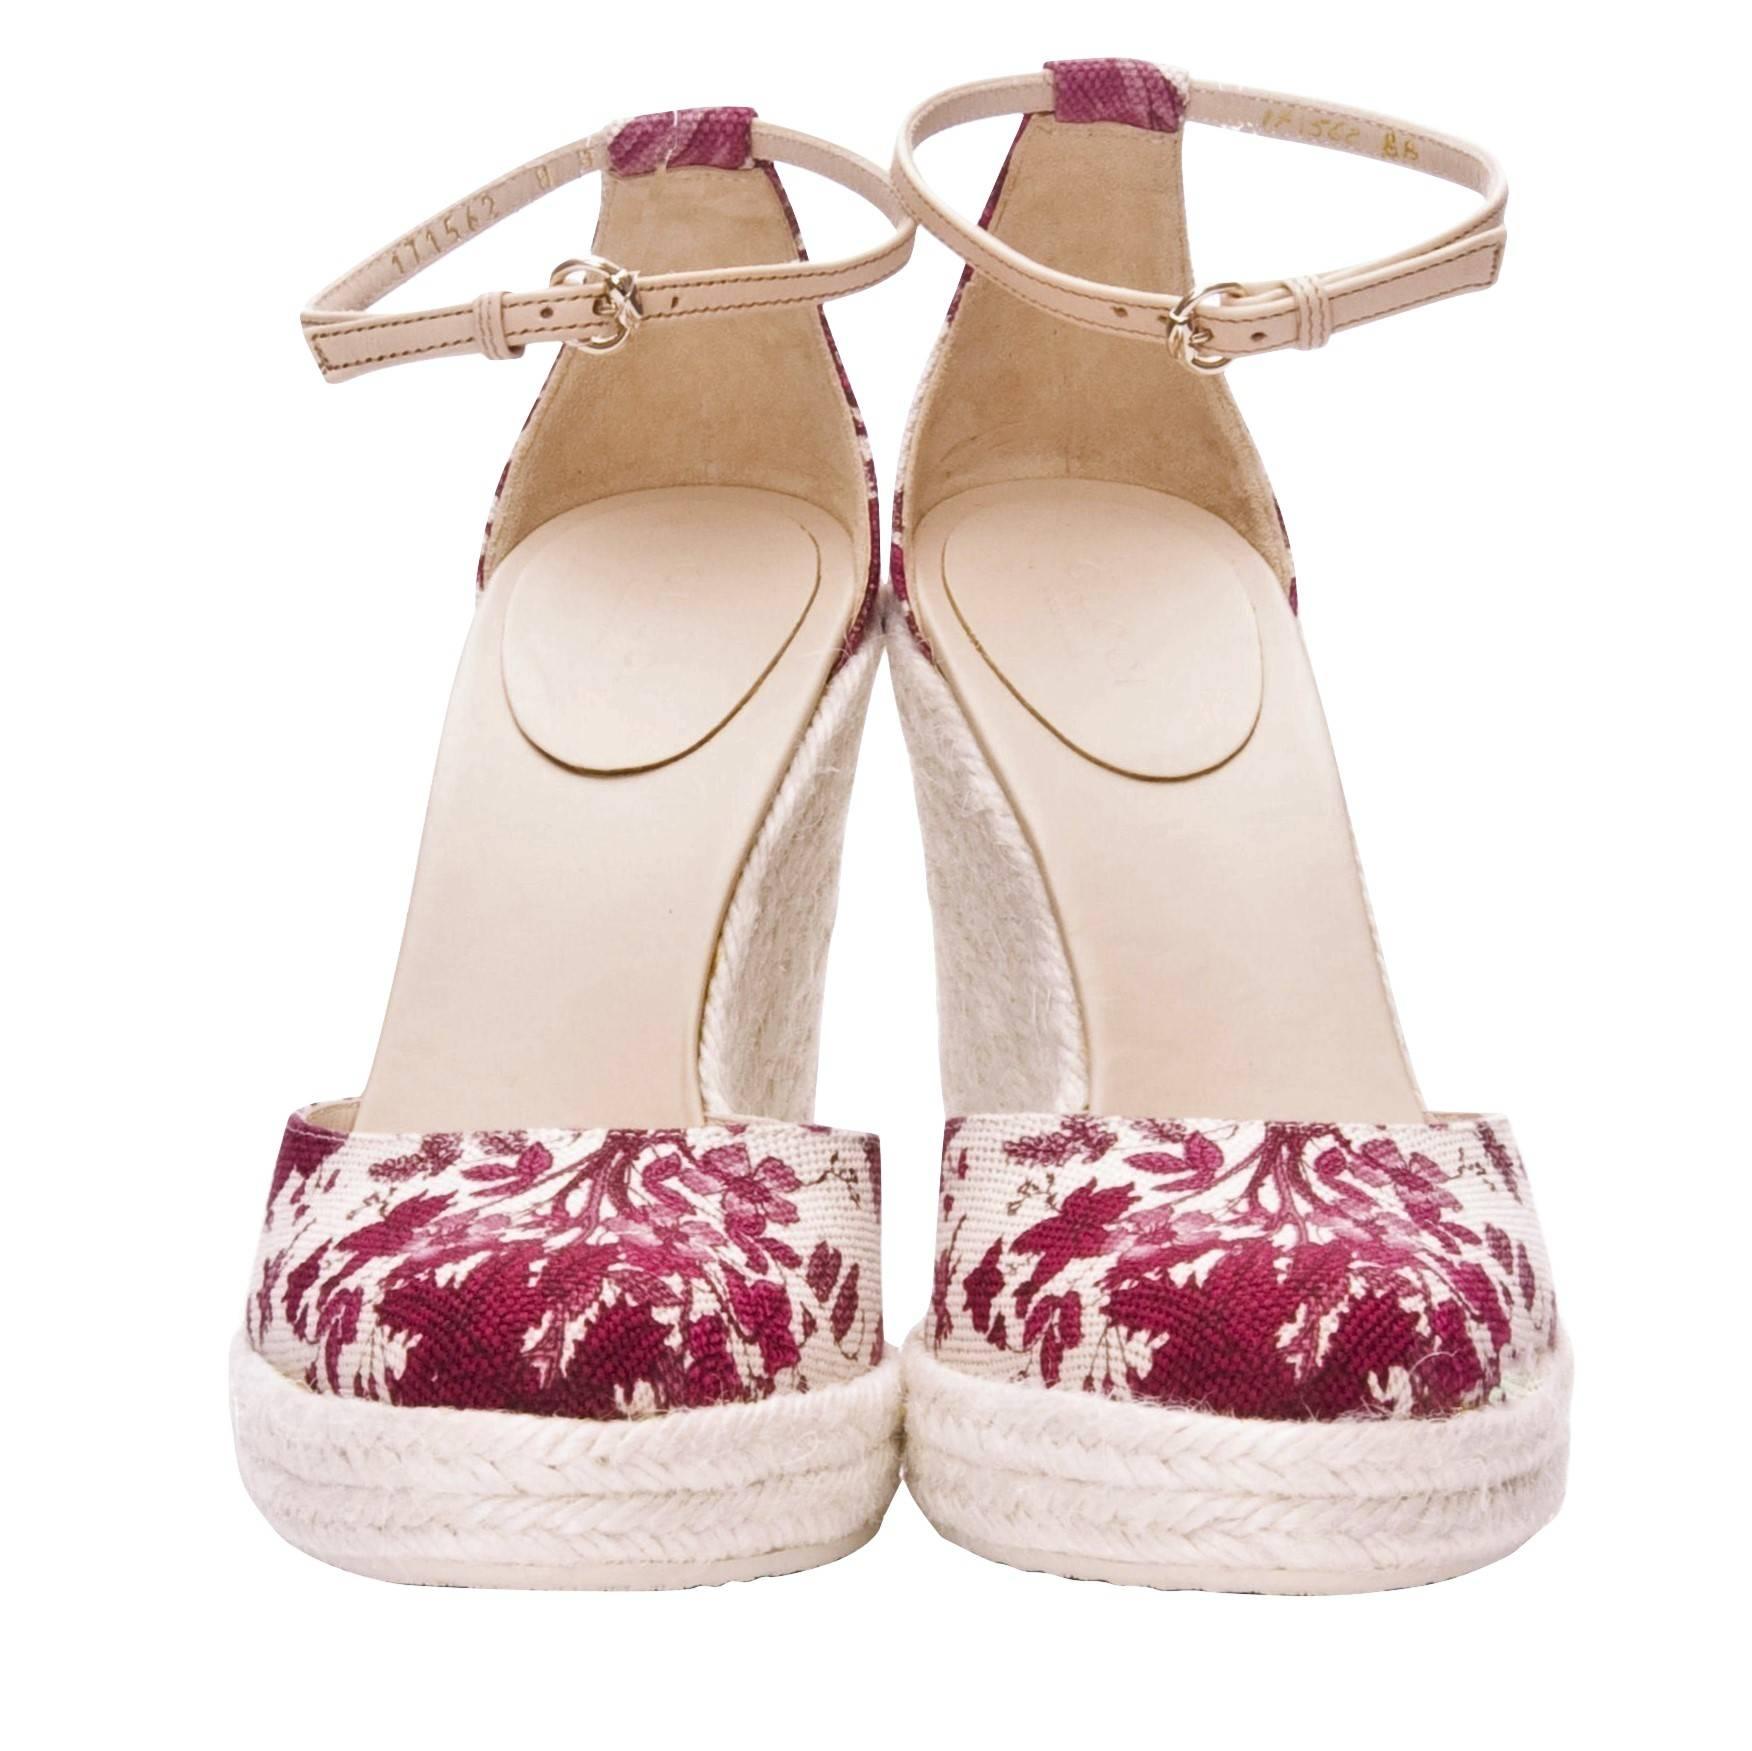 Gucci Cruise New 2007 Runway Flora Wedge Espadrille talons Taille 9 en vente 2